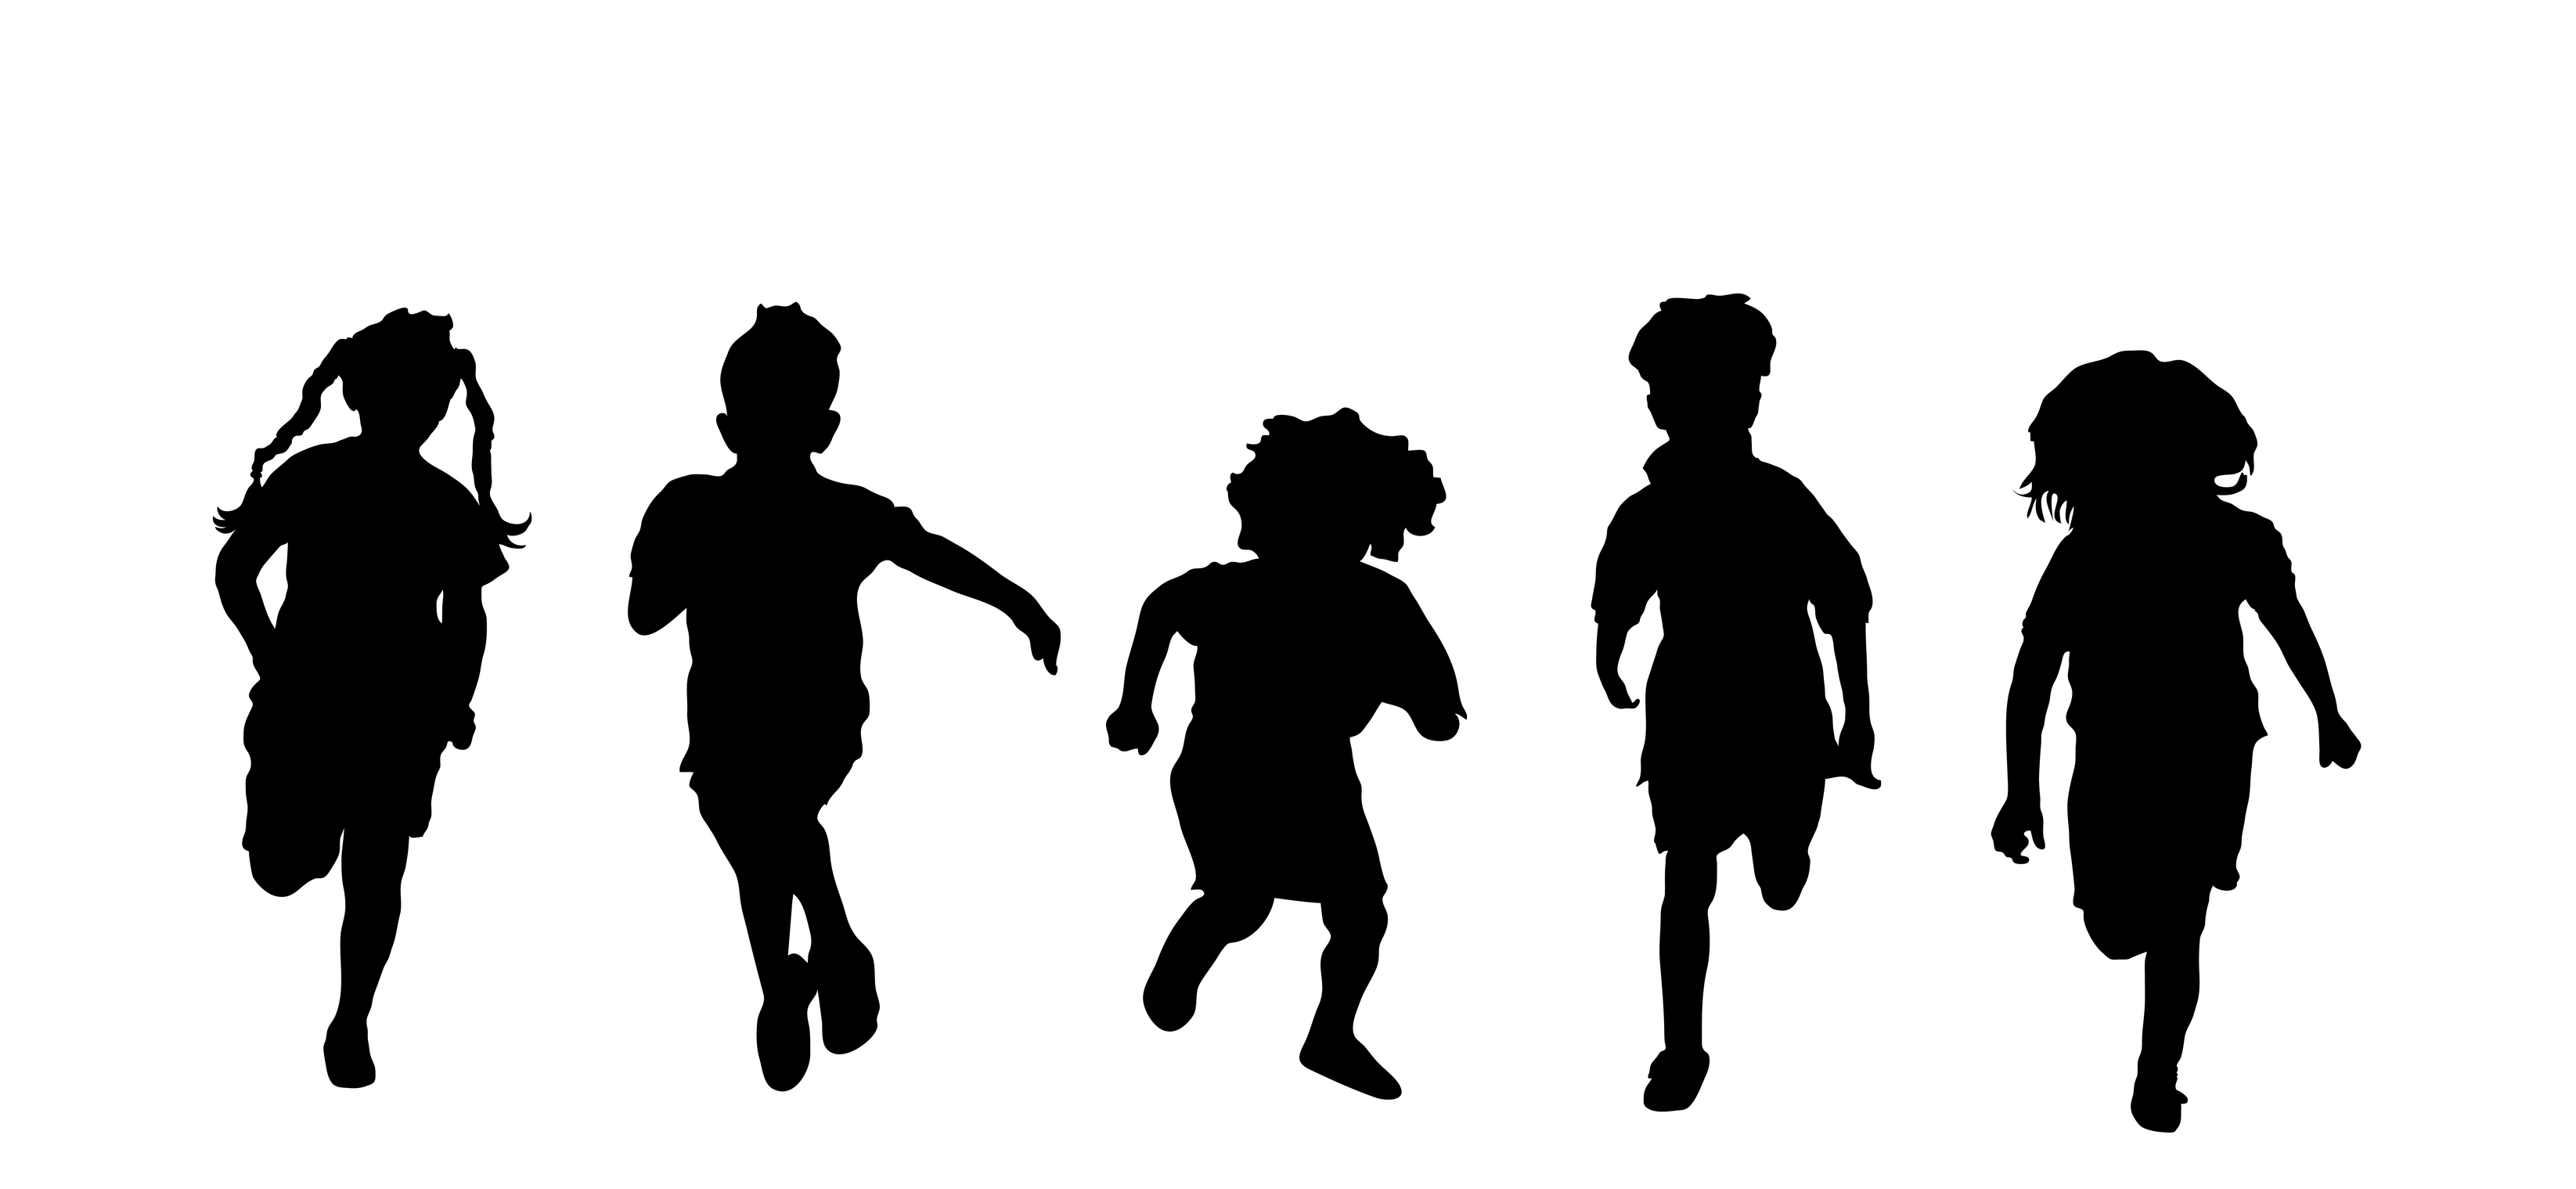 Kids Jumping Silhouette Png